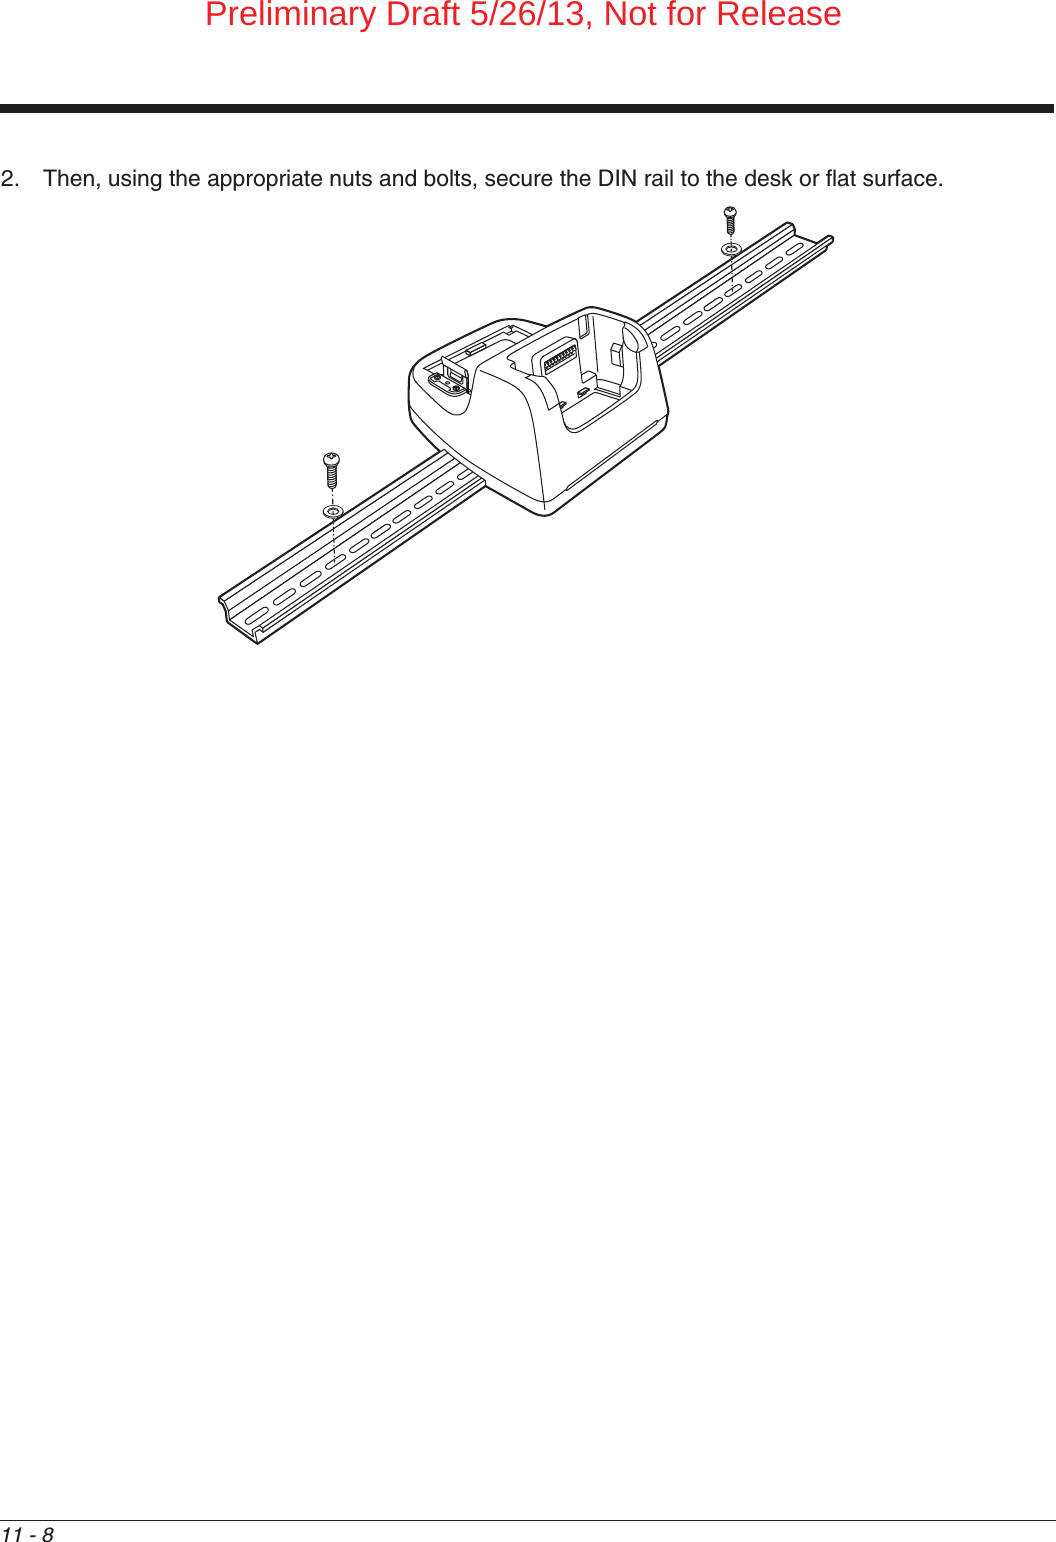 11 - 82. Then, using the appropriate nuts and bolts, secure the DIN rail to the desk or flat surface.Preliminary Draft 5/26/13, Not for Release